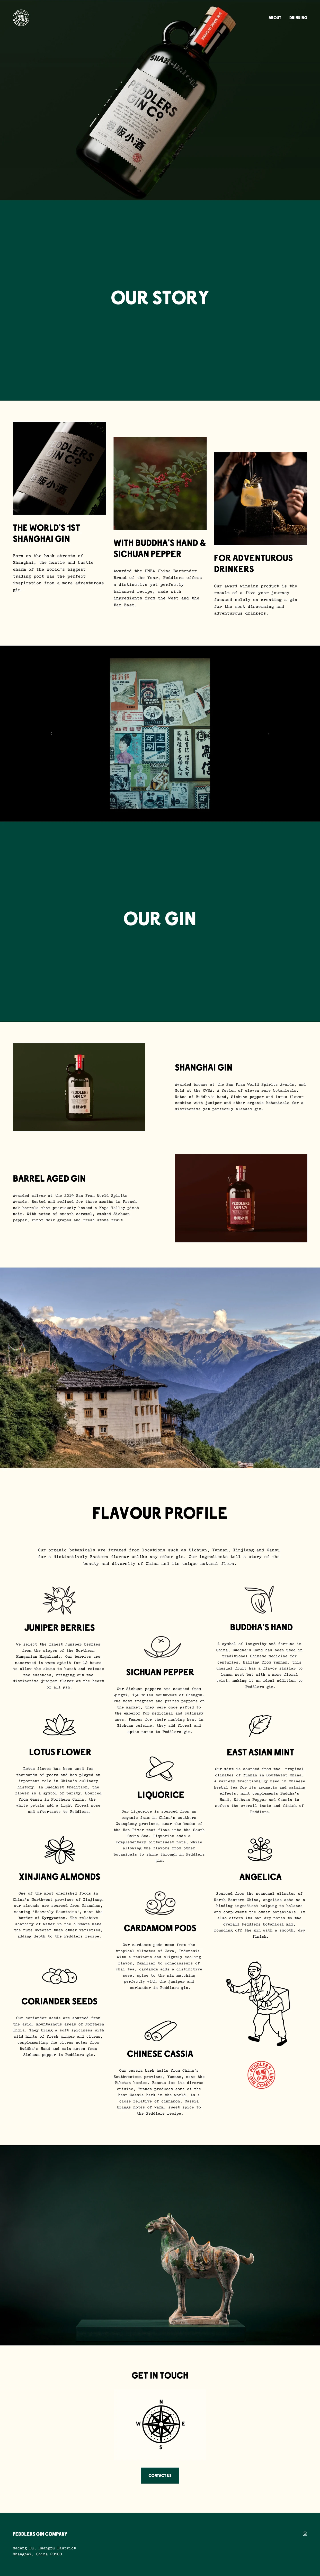 Peddlers Gin Landing Page Example: Born on the back streets of Shanghai, the hustle and bustle  charm of the world’s biggest trading port was the perfect inspiration from a more adventurous gin. Awarded the DMBA China Bartender Brand of the Year, Peddlers offers a distinctive yet perfectly balanced recipe, made with ingredients from the West and the Far East.